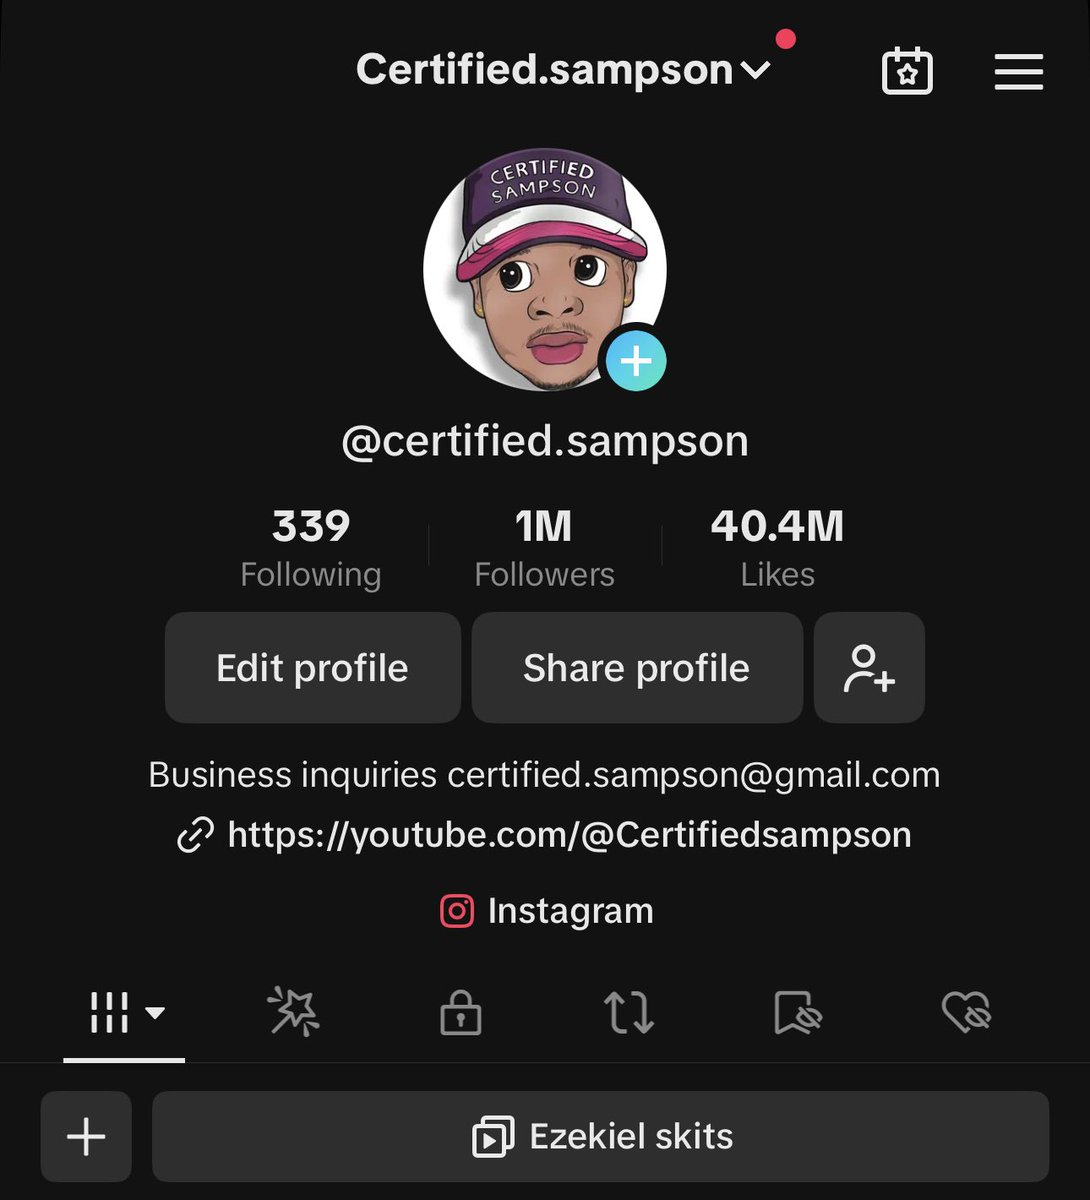 TikTok have nothing to do with twitter…..but I thought I’d share this accomplishment with yall still … justhit 1 million TikTok followers … I’m sure some of you follow me across on TikTok as well so thank you for all your support ! Truly appreciate the love yall show !